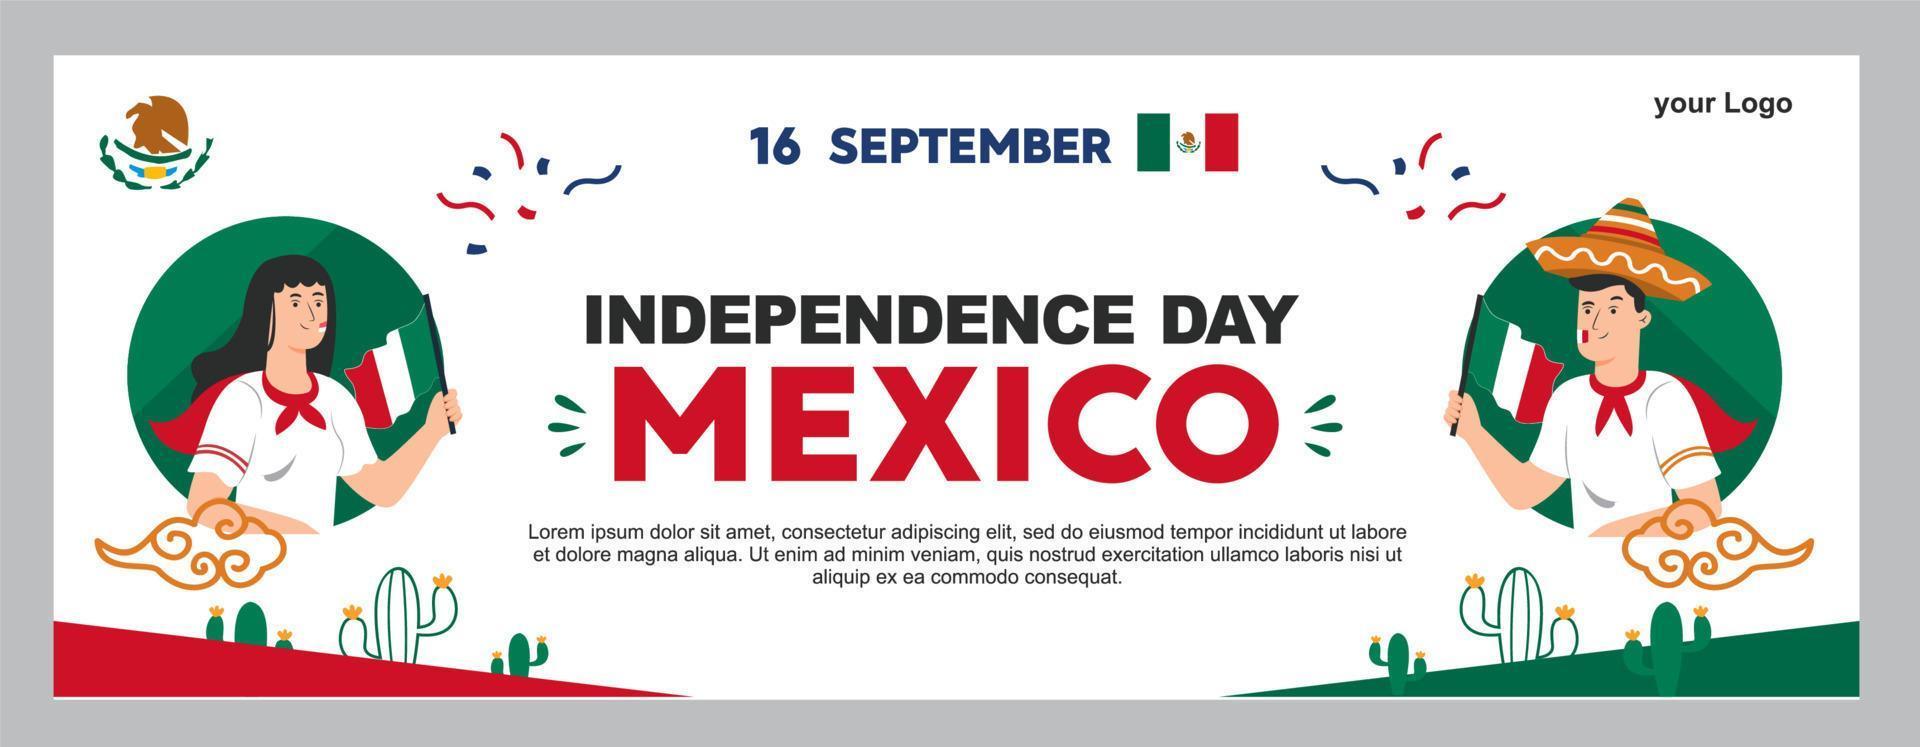 mexican independence day illustration, september 16th poster for background. viva mexico vector